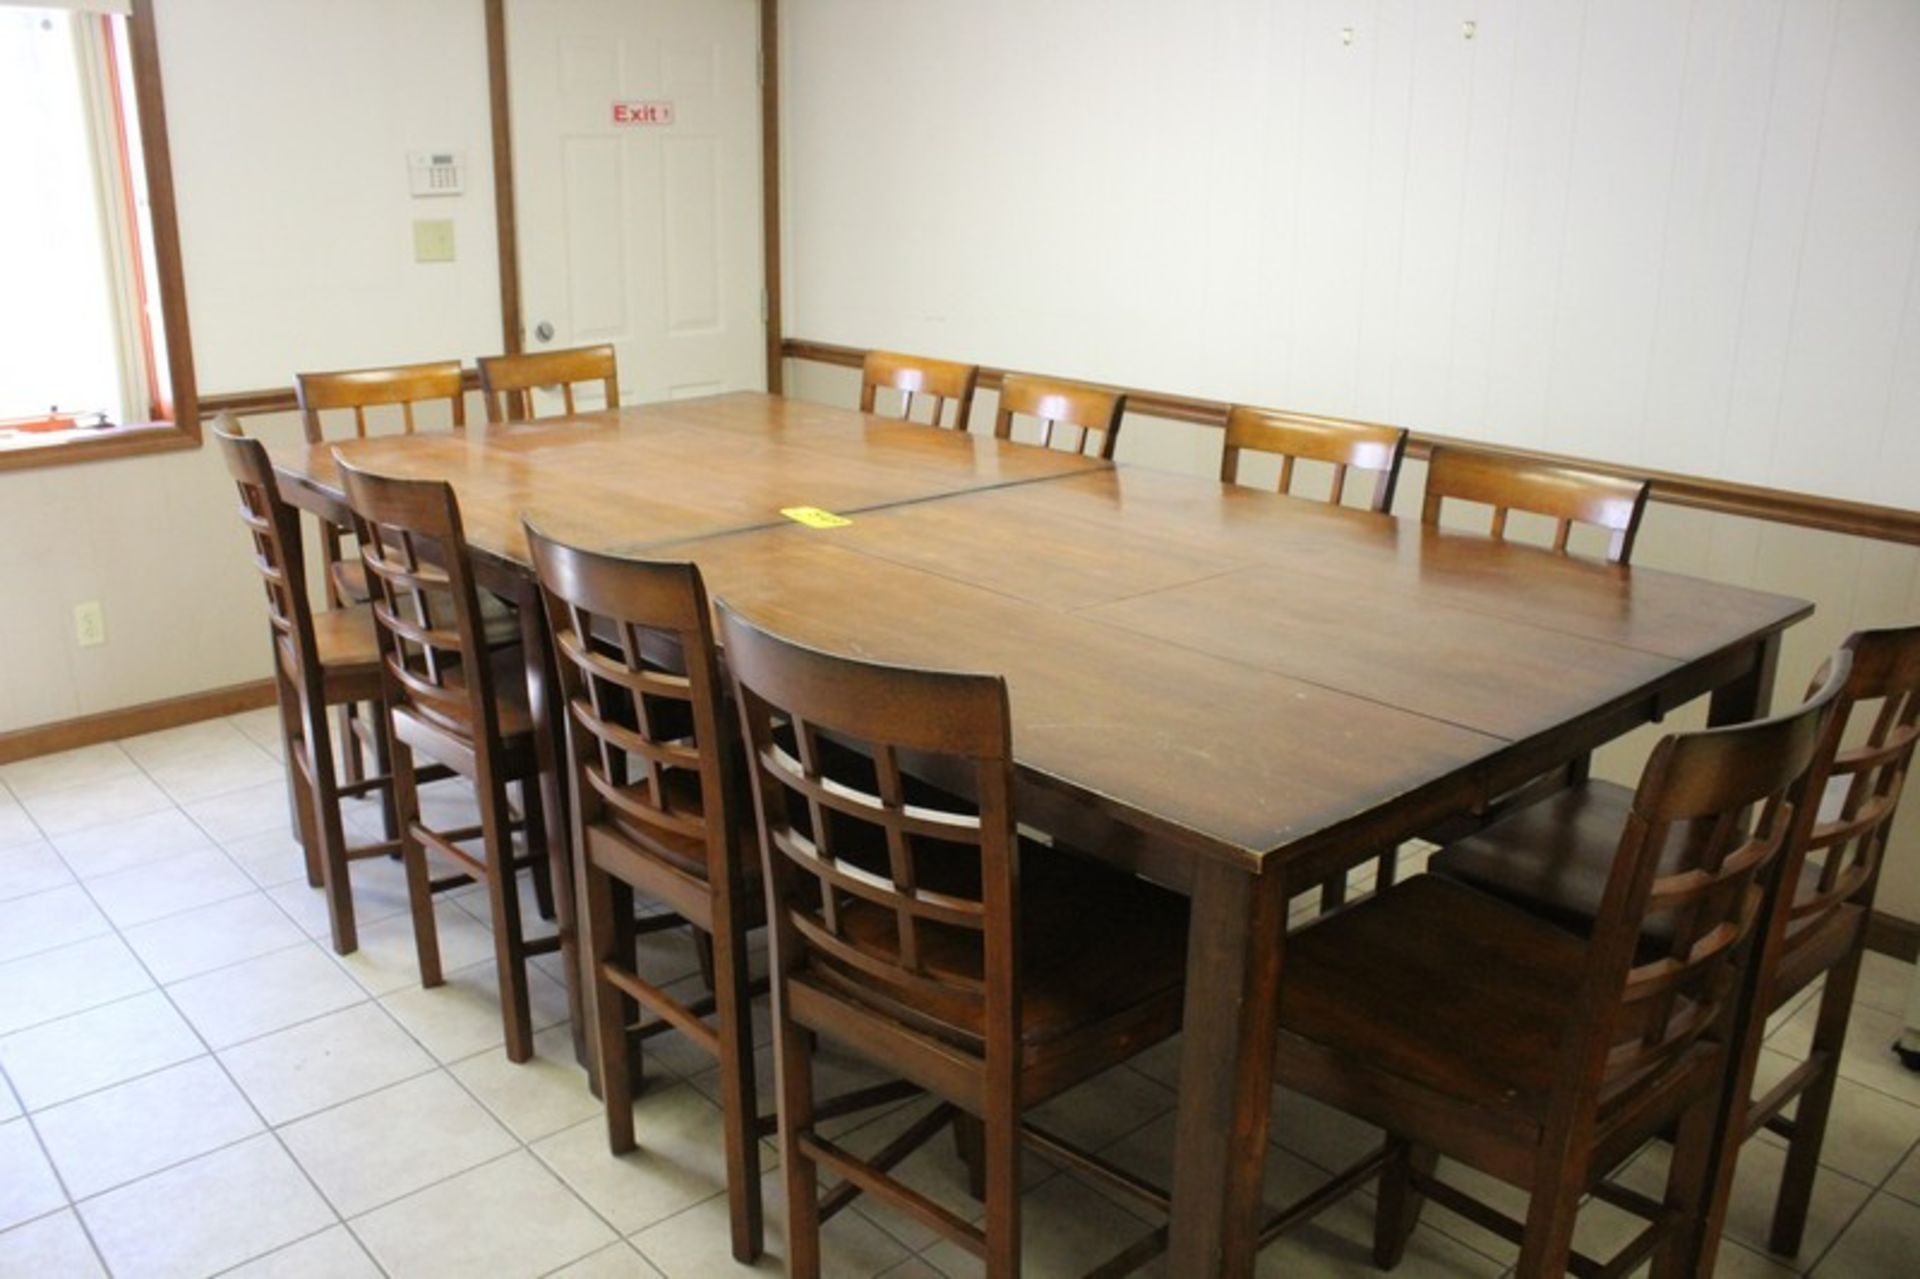 RAISED MEETING TABLE 9' X 54" X 36" TALL WITH 12 STOOL WITH BACKS